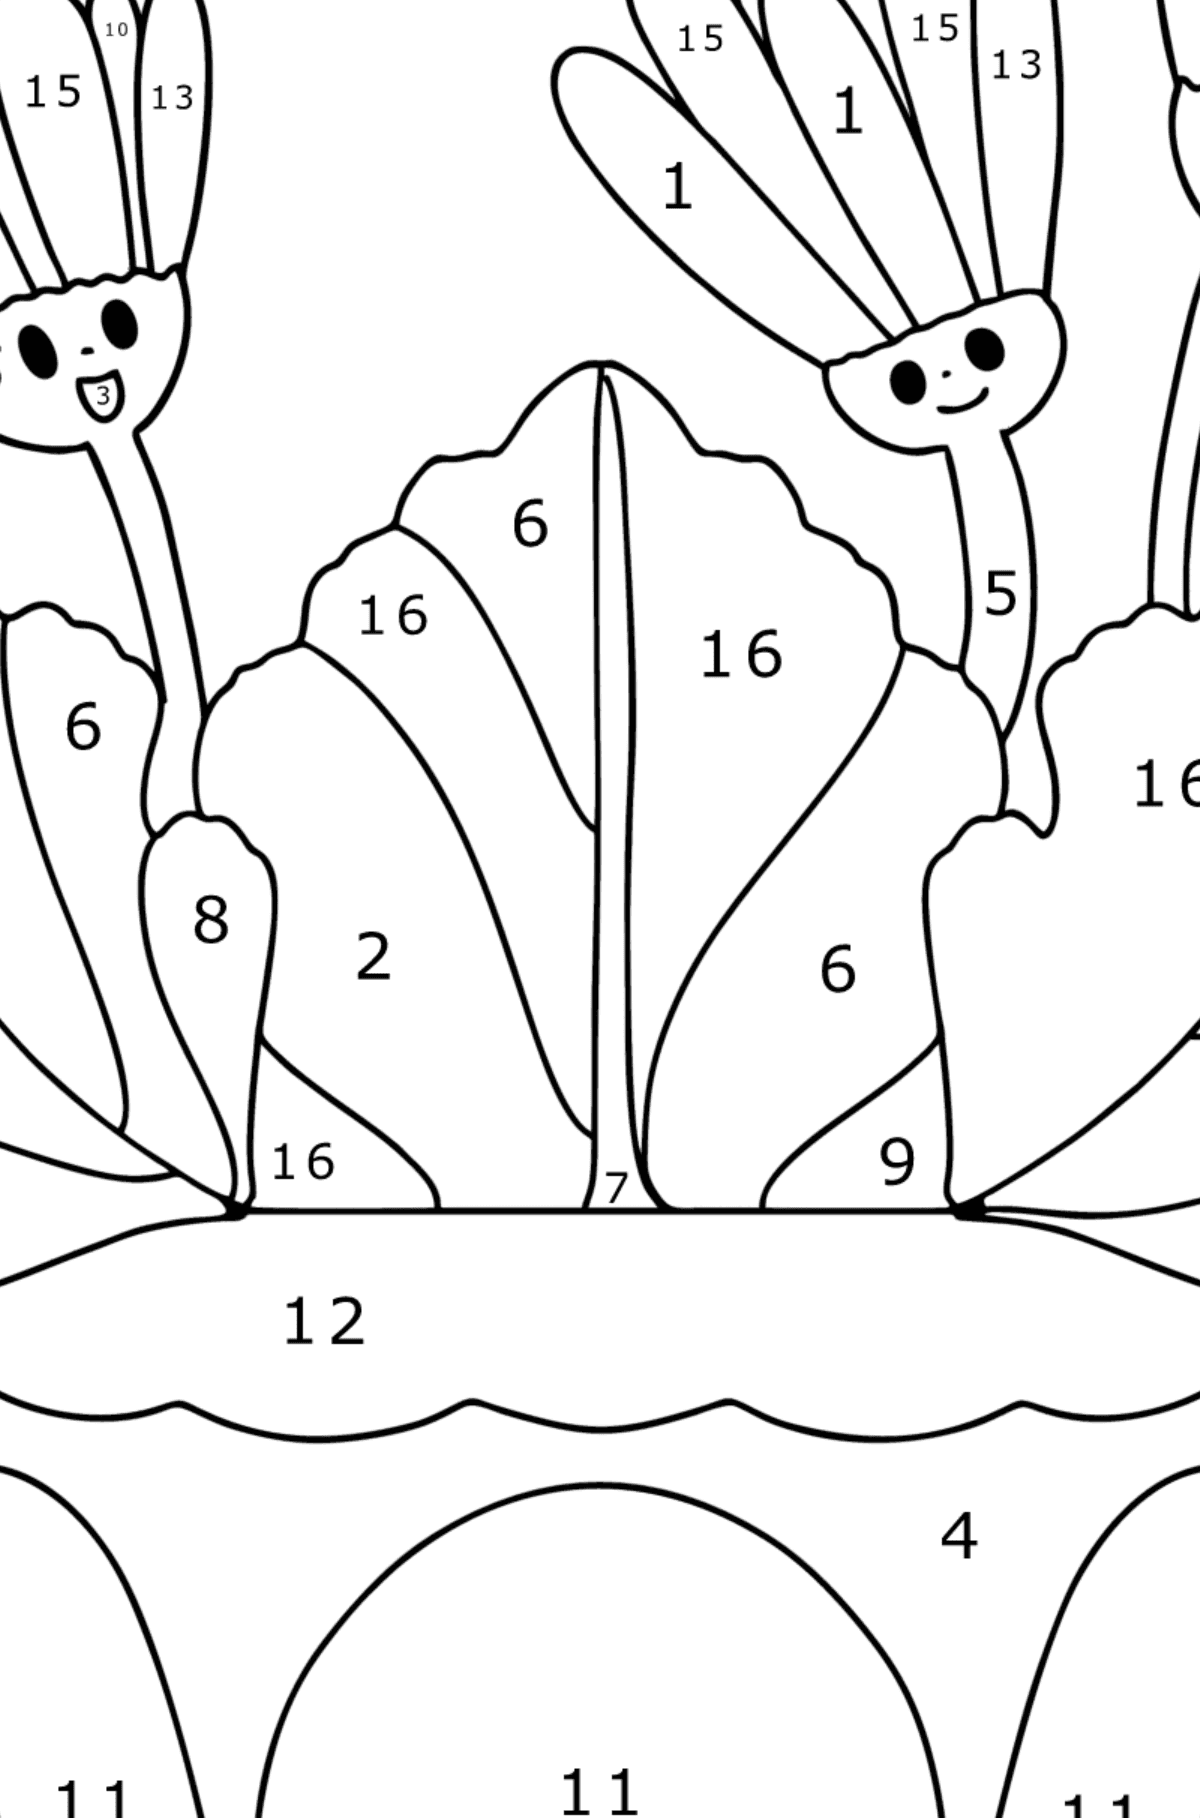 Primrose with eyes coloring page - Coloring by Numbers for Kids